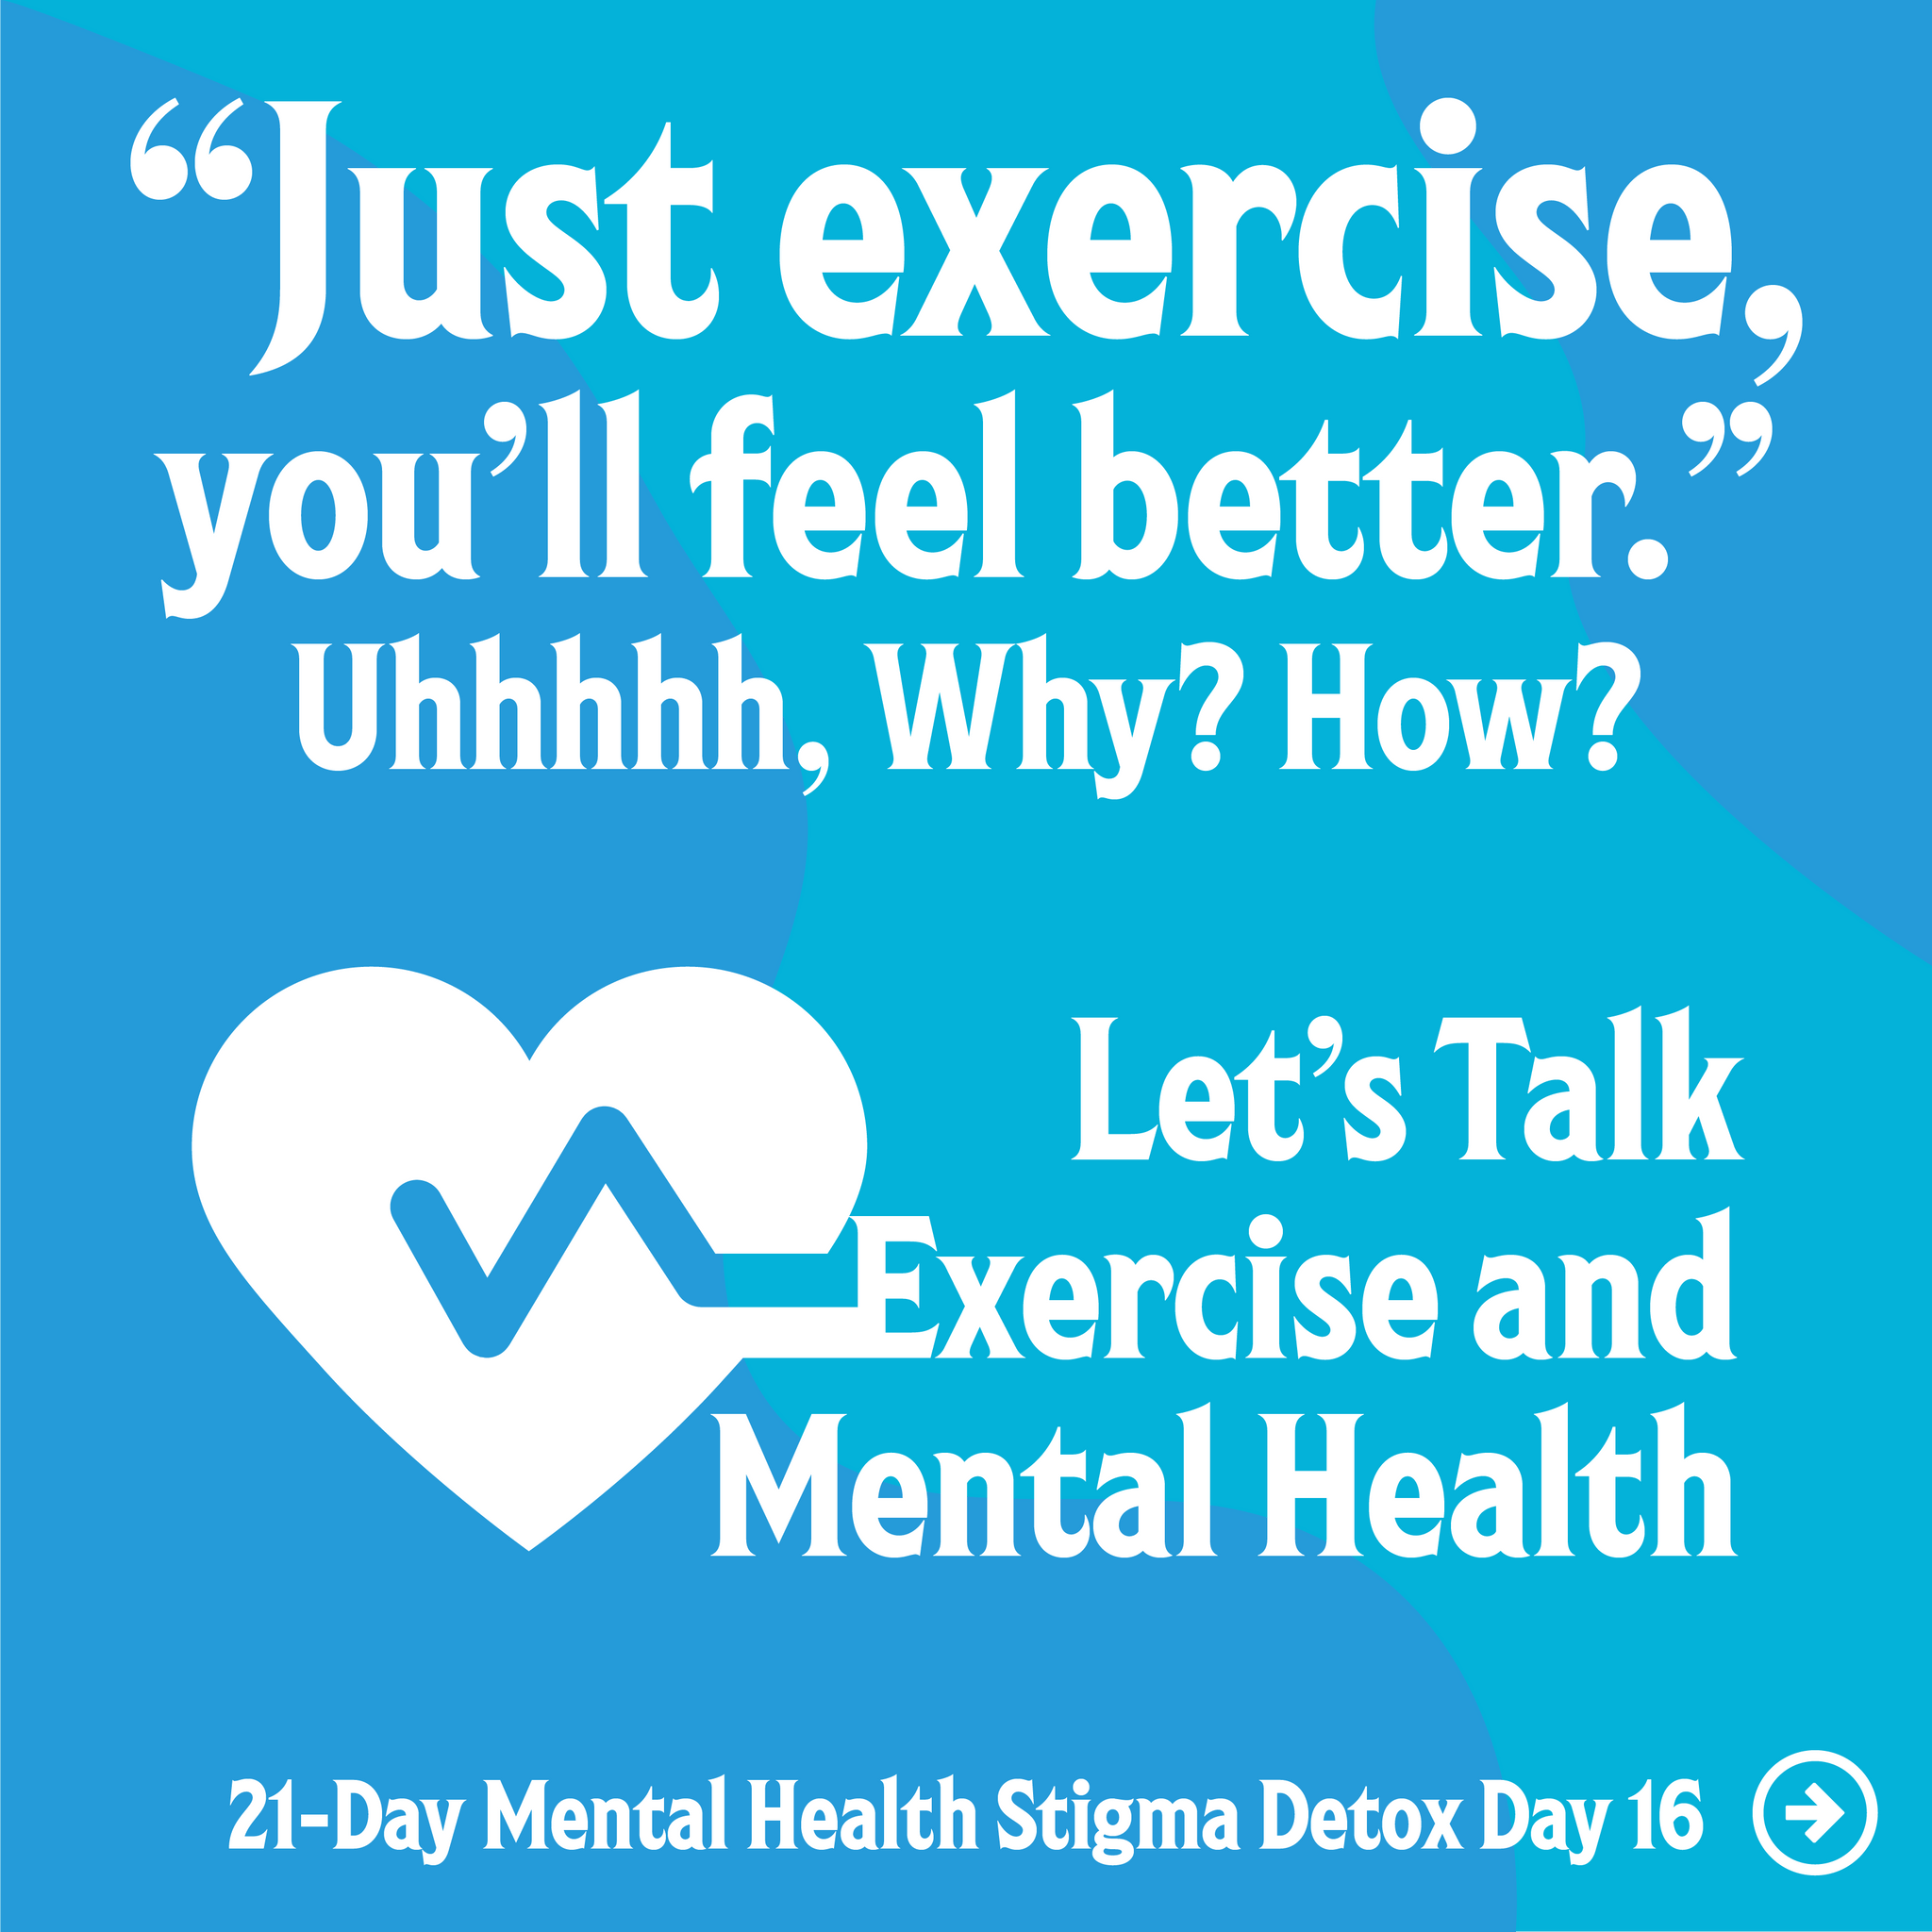 Let’s Talk Exercise and Mental Health - MHSD Day 16